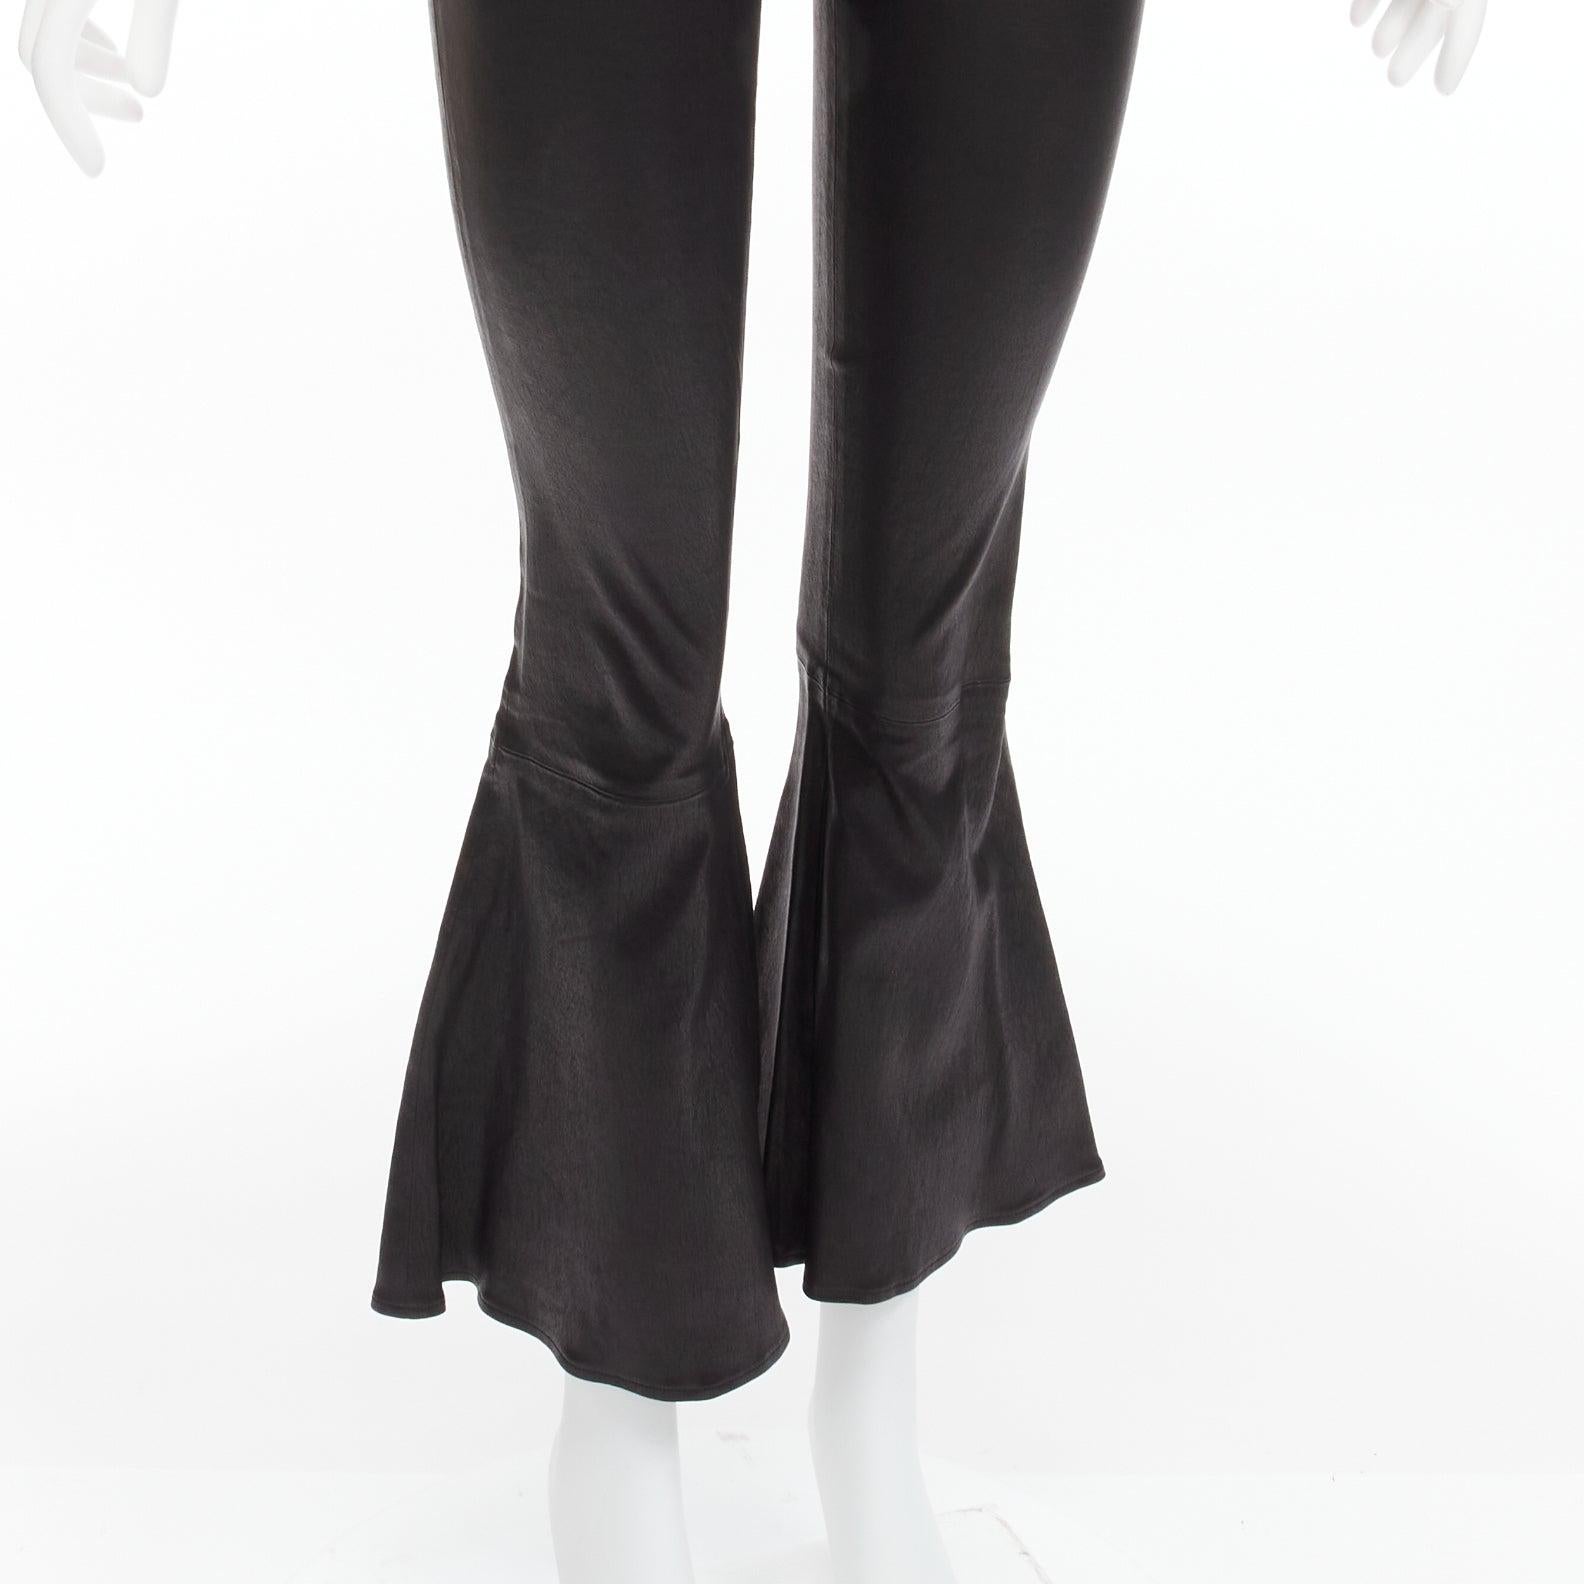 FRAME black genuine lambskin leather flared cropped pants US2 S
Reference: LNKO/A02221
Brand: Frame
Material: Leather
Color: Black
Pattern: Solid
Closure: Zip
Lining: Grey Fabric
Extra Details: Zip side.
Made in: China

CONDITION:
Condition: Very